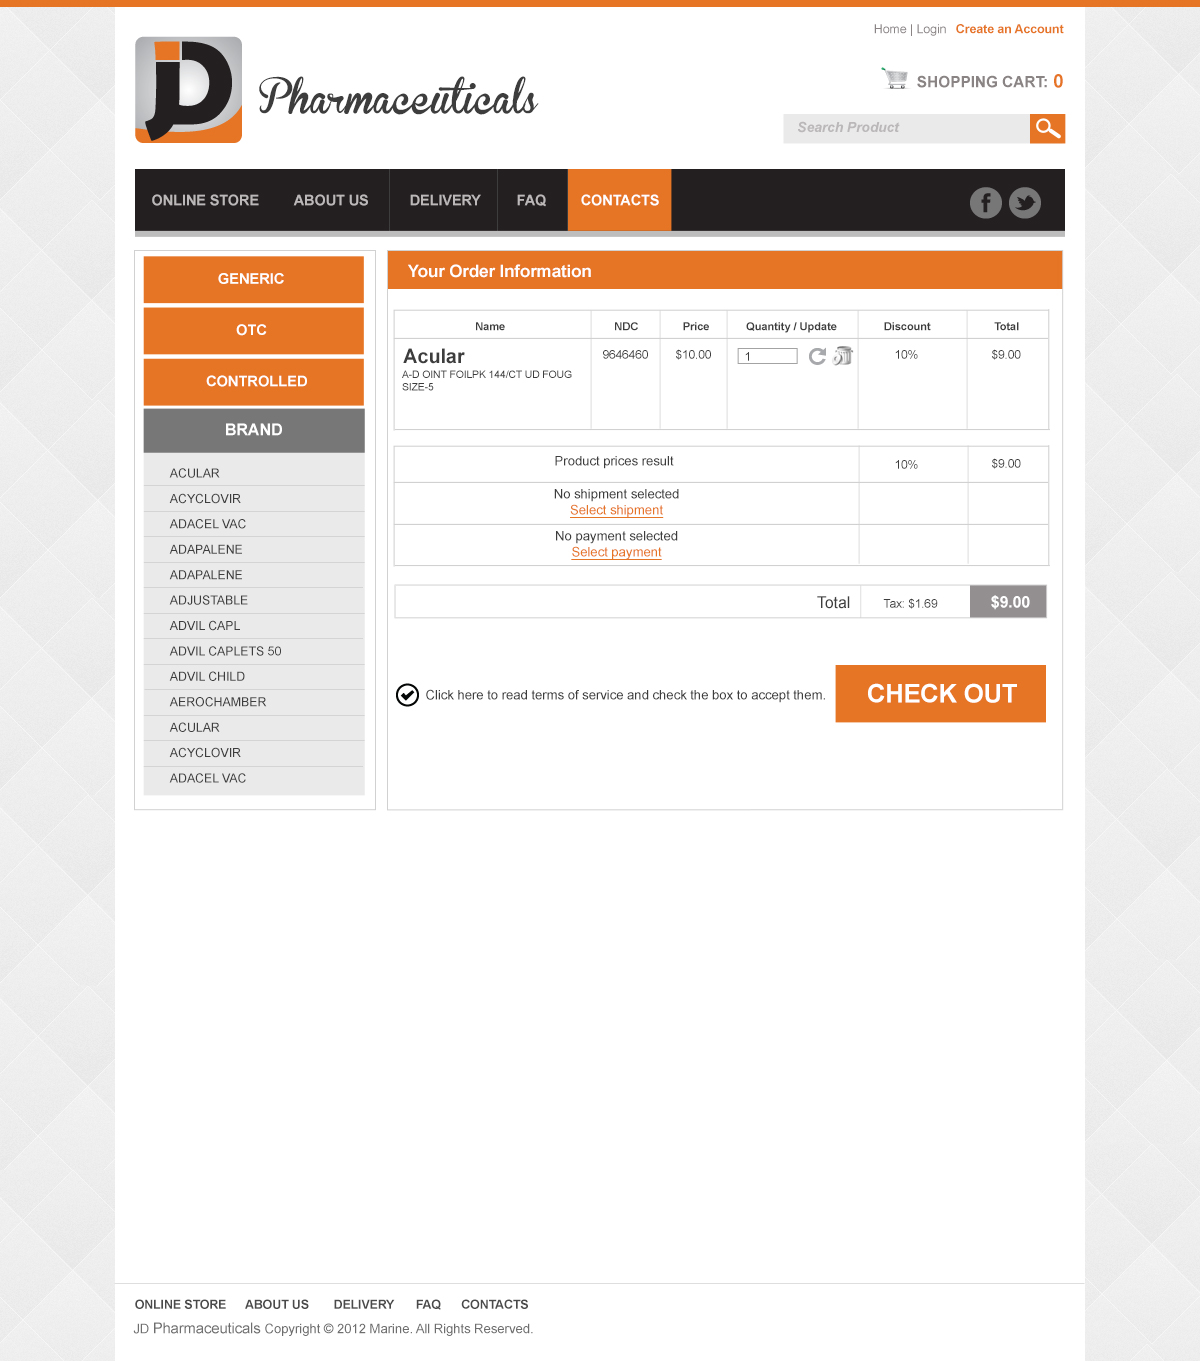 JD-Pharmaceuticals checkout and product page design